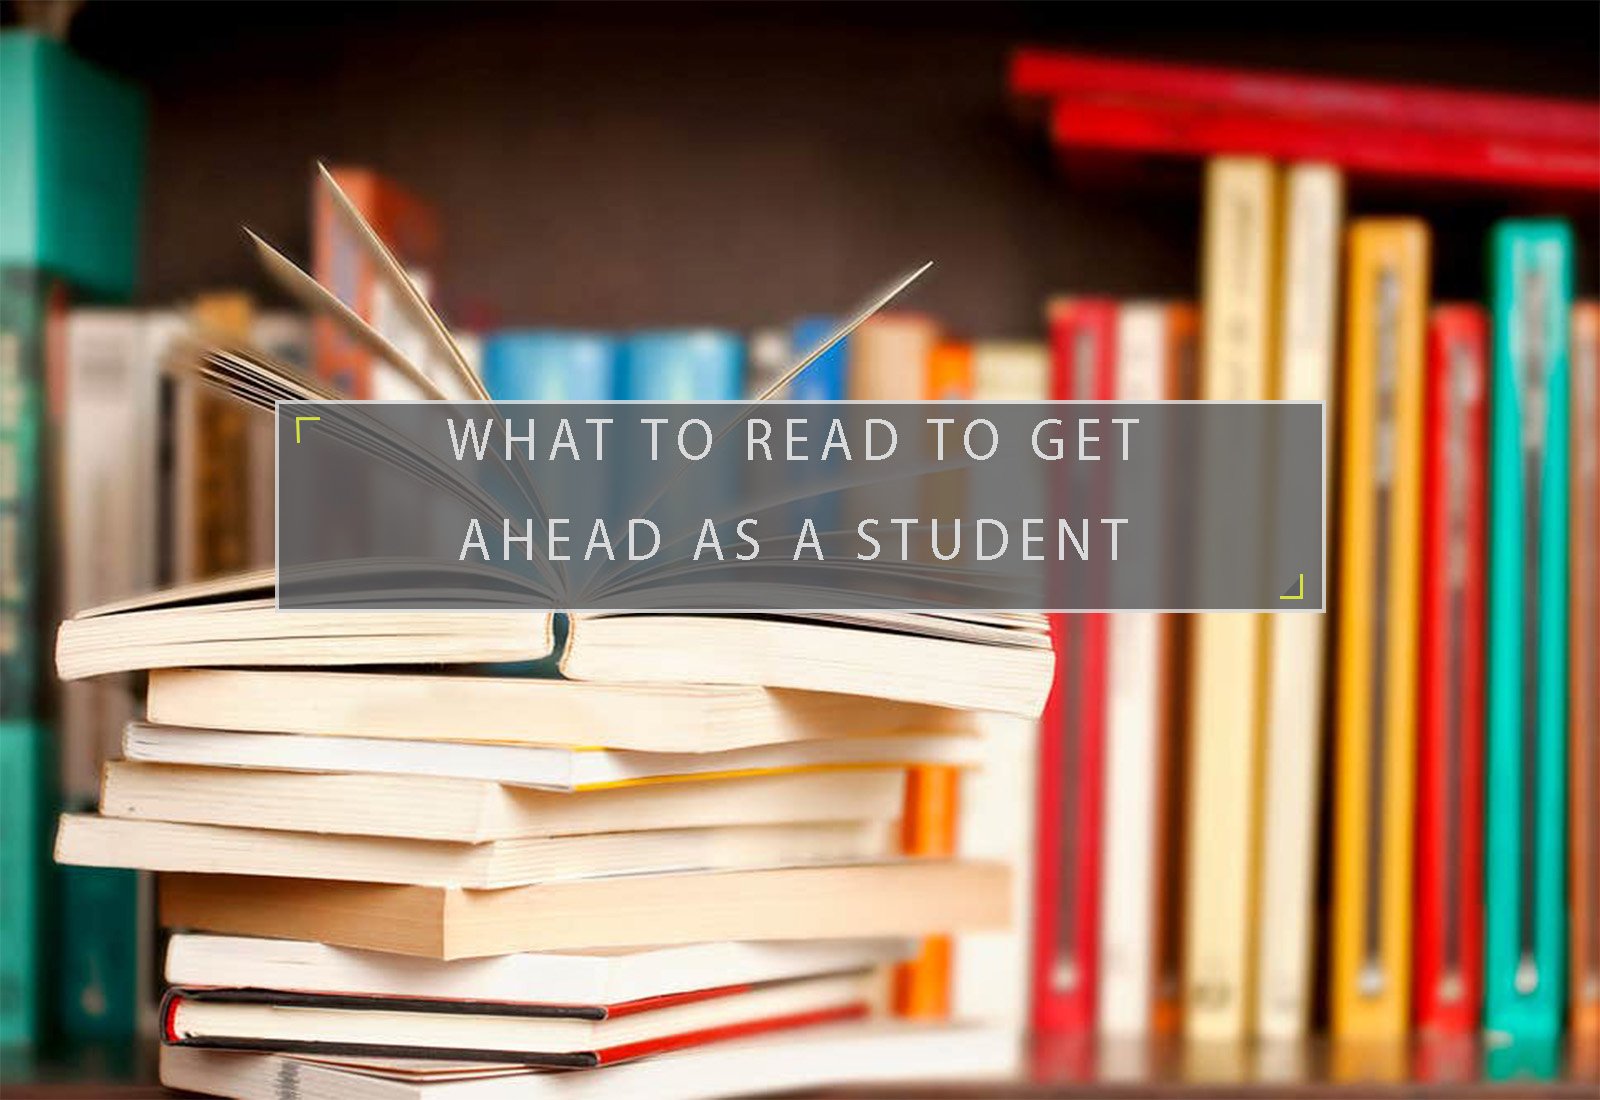 What To Read To Get Ahead As A Student